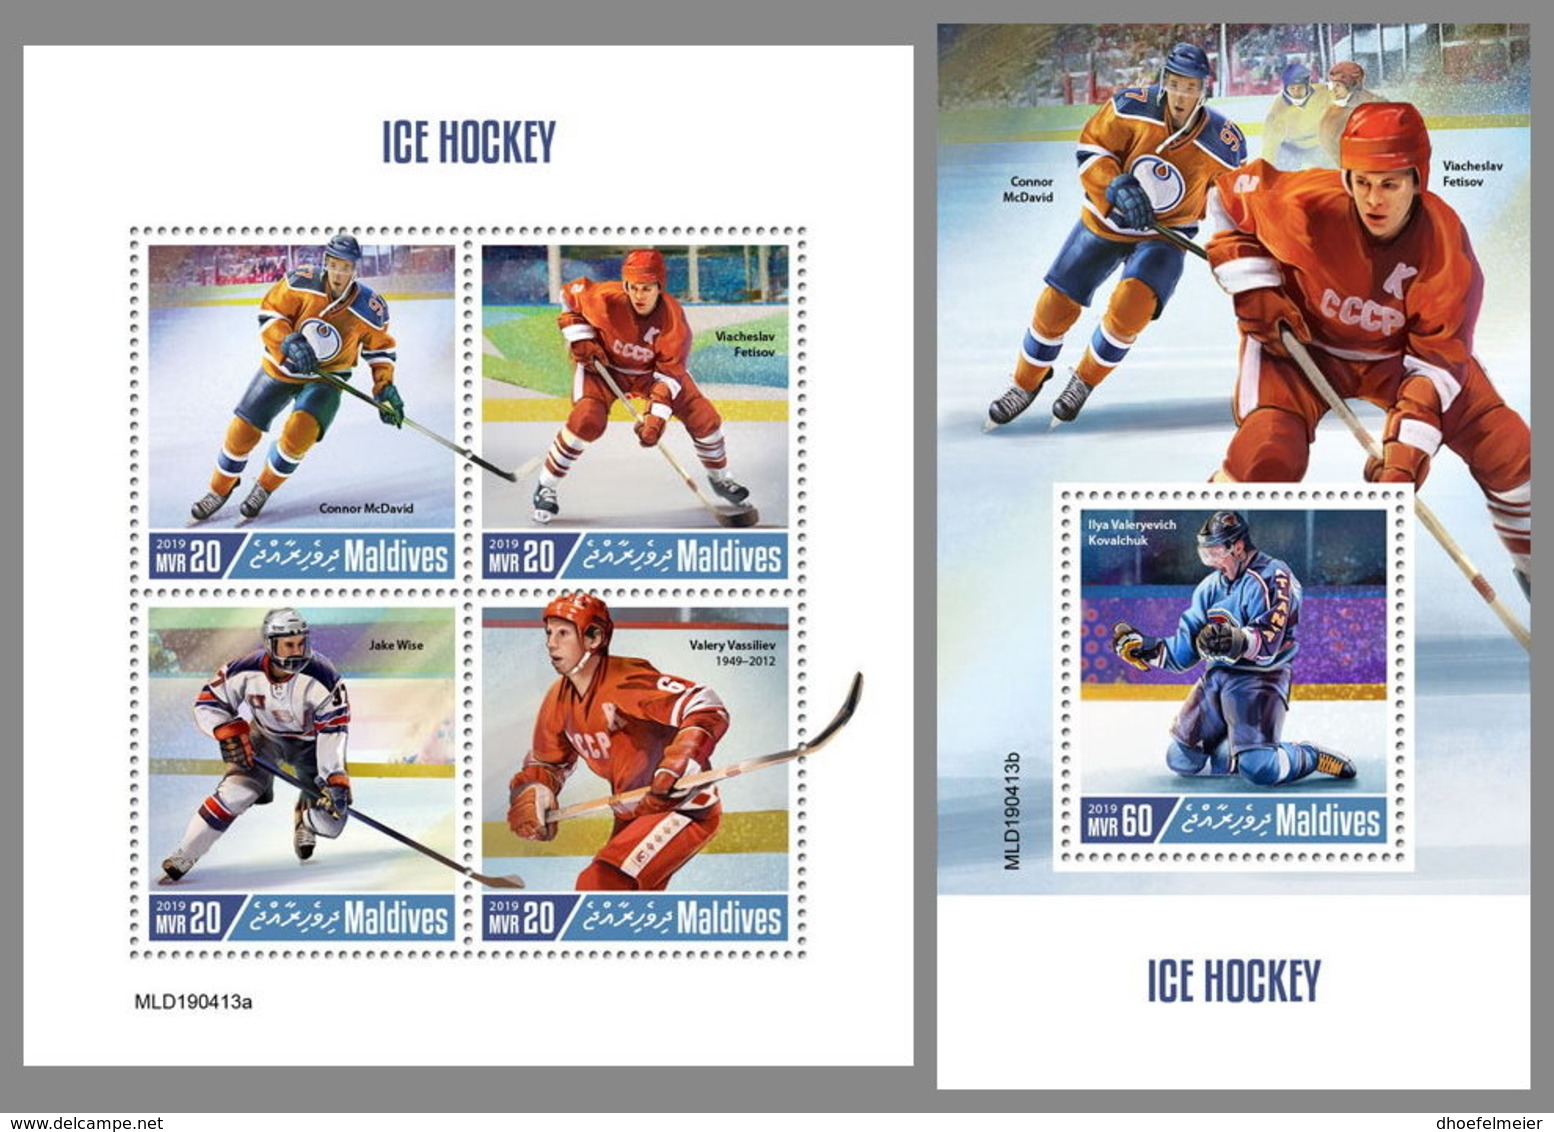 MALDIVES 2019 MNH Ice Hockey Eishockey Hockey Sur Glace M/S+S/S - OFFICIAL ISSUE - DH1930 - Hockey (sur Glace)